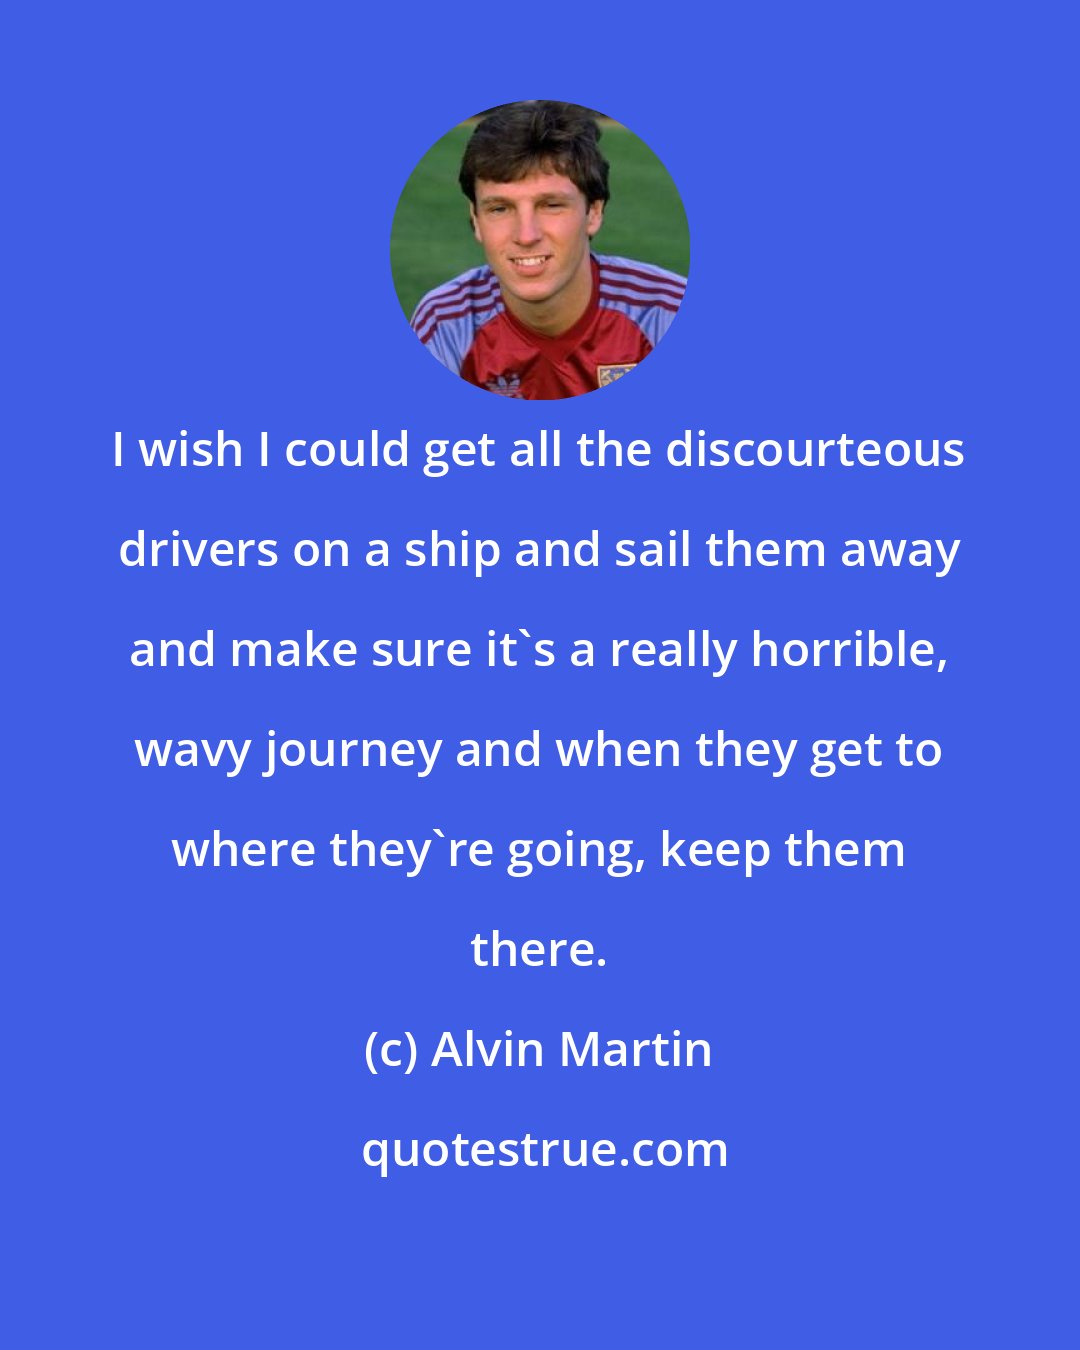 Alvin Martin: I wish I could get all the discourteous drivers on a ship and sail them away and make sure it's a really horrible, wavy journey and when they get to where they're going, keep them there.